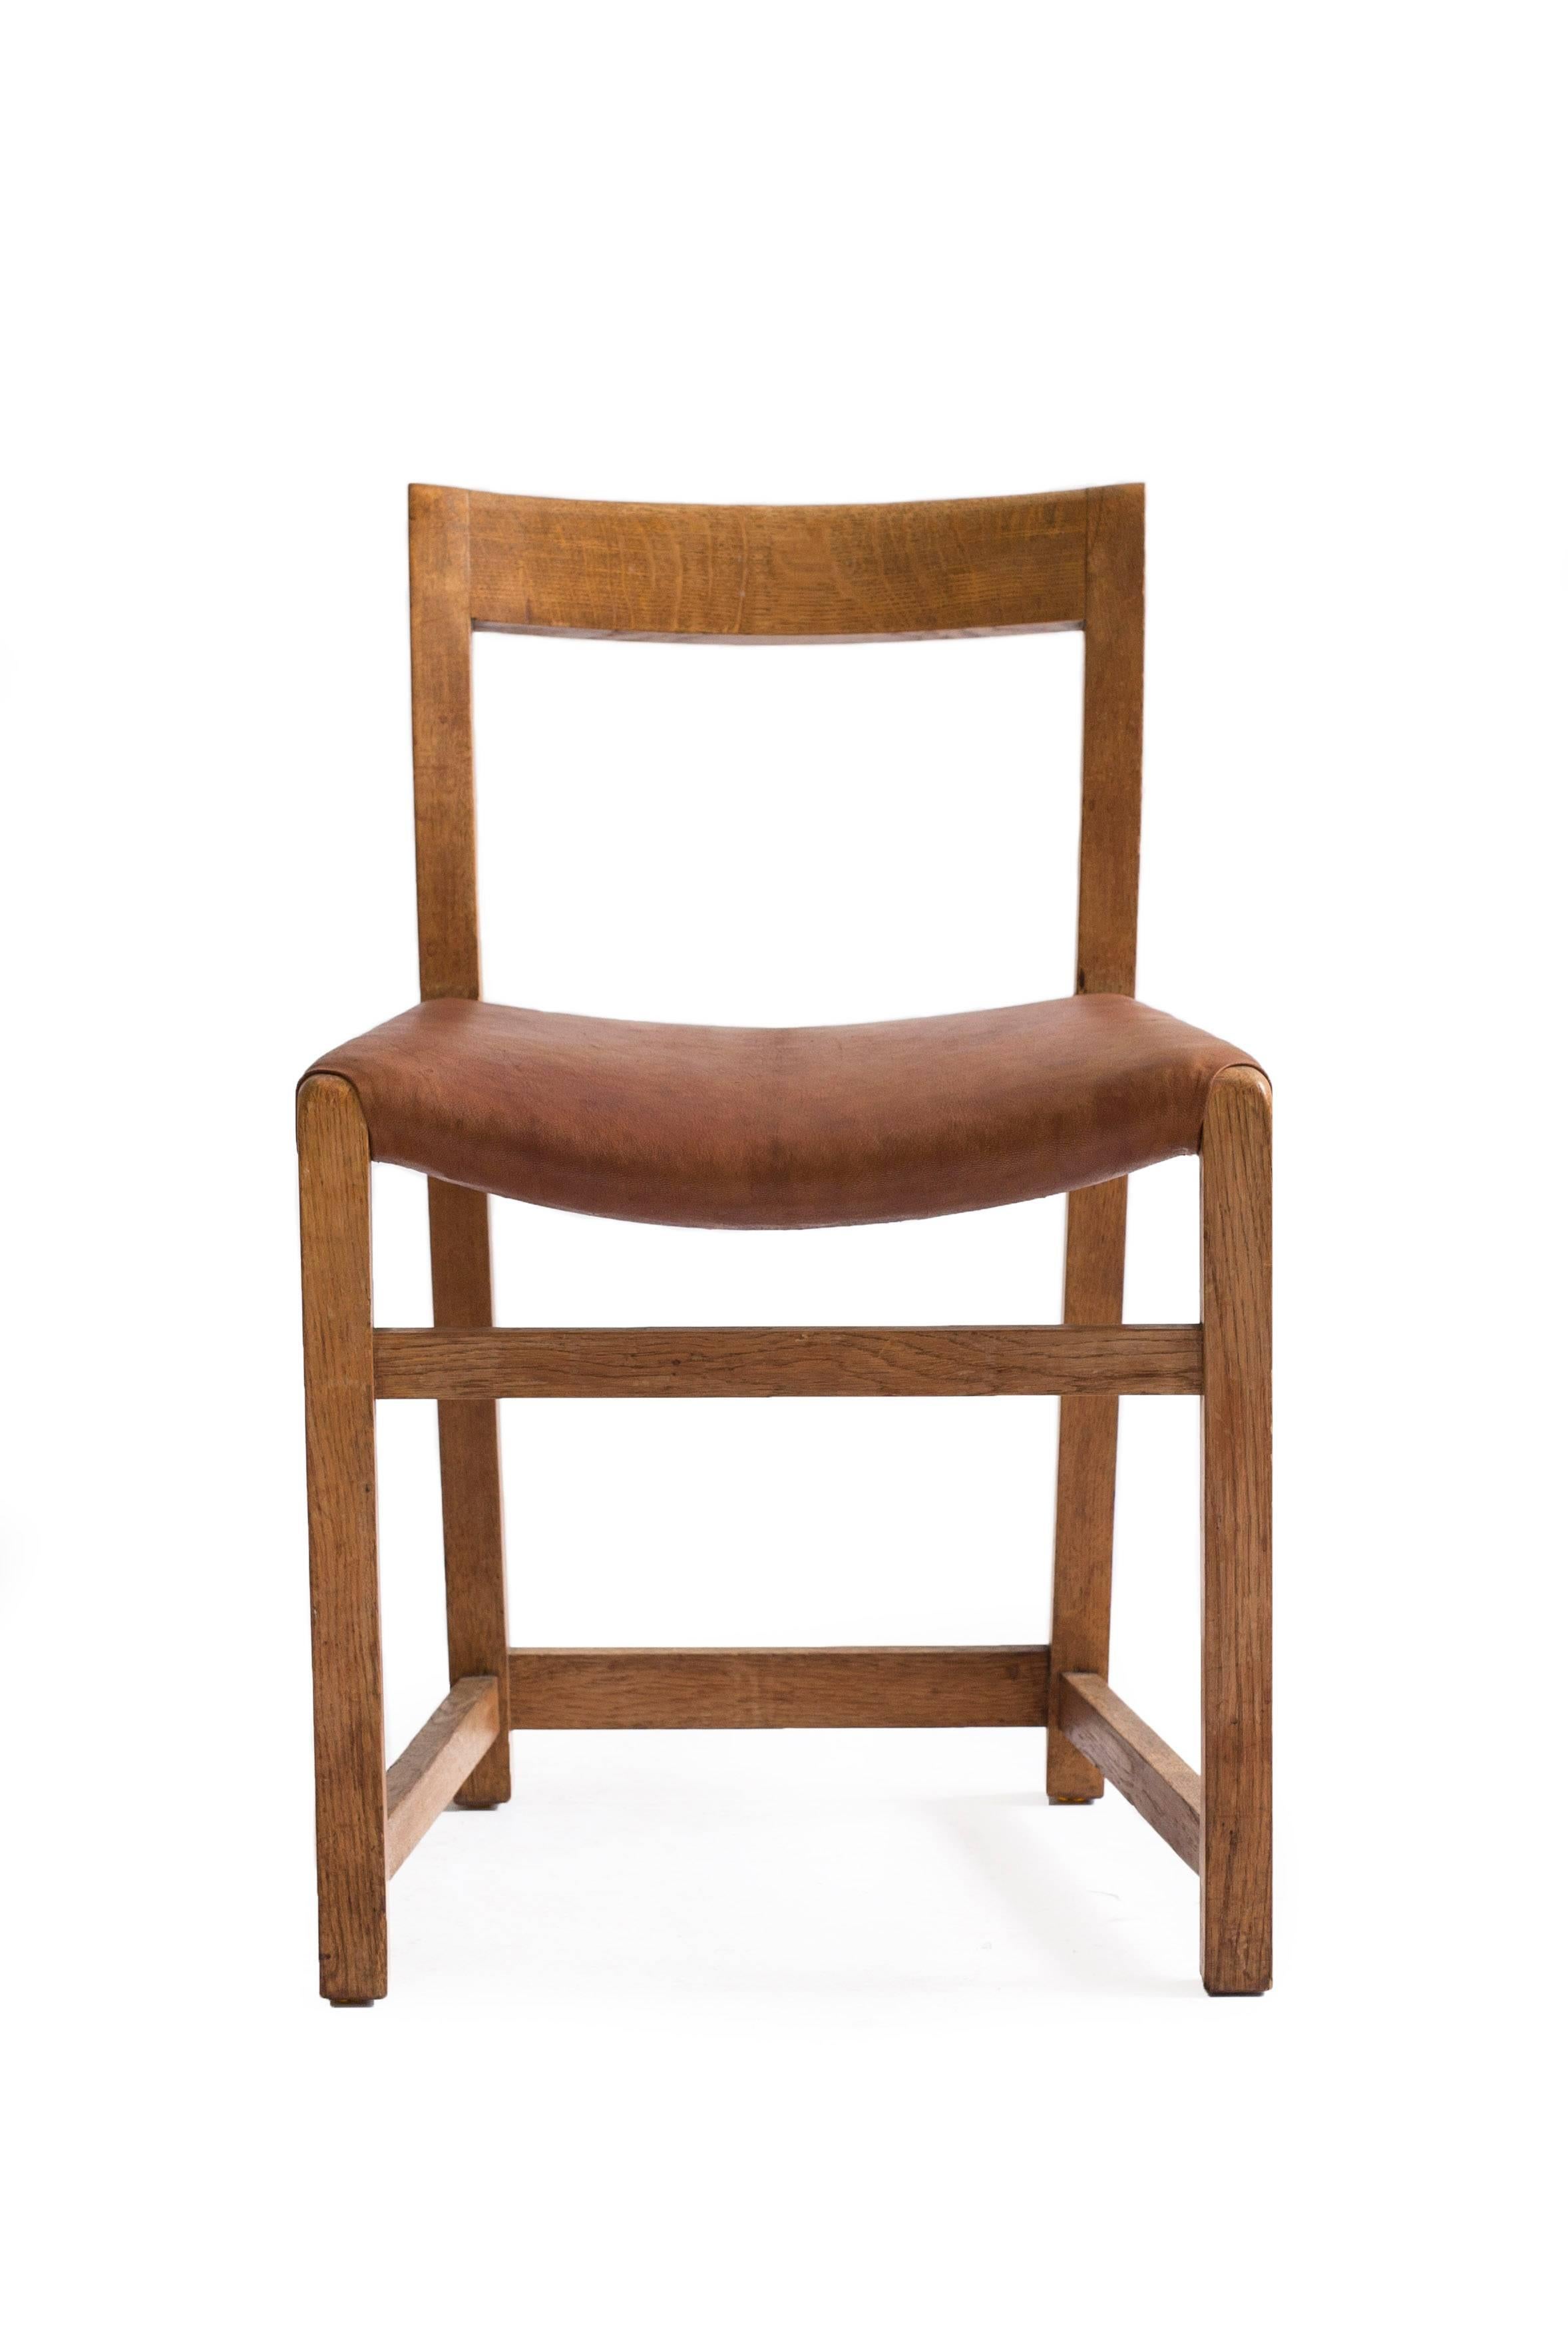 Rare Mogens Lassen side chair with frame of patinated oak, seat upholstered with Niger leather.

Designed 1934-1935 for the Eggert Møller villa, Gentofte, Denmark as part of "Le vrai total". Executed by cabinetmaker A. J. Iversen.

